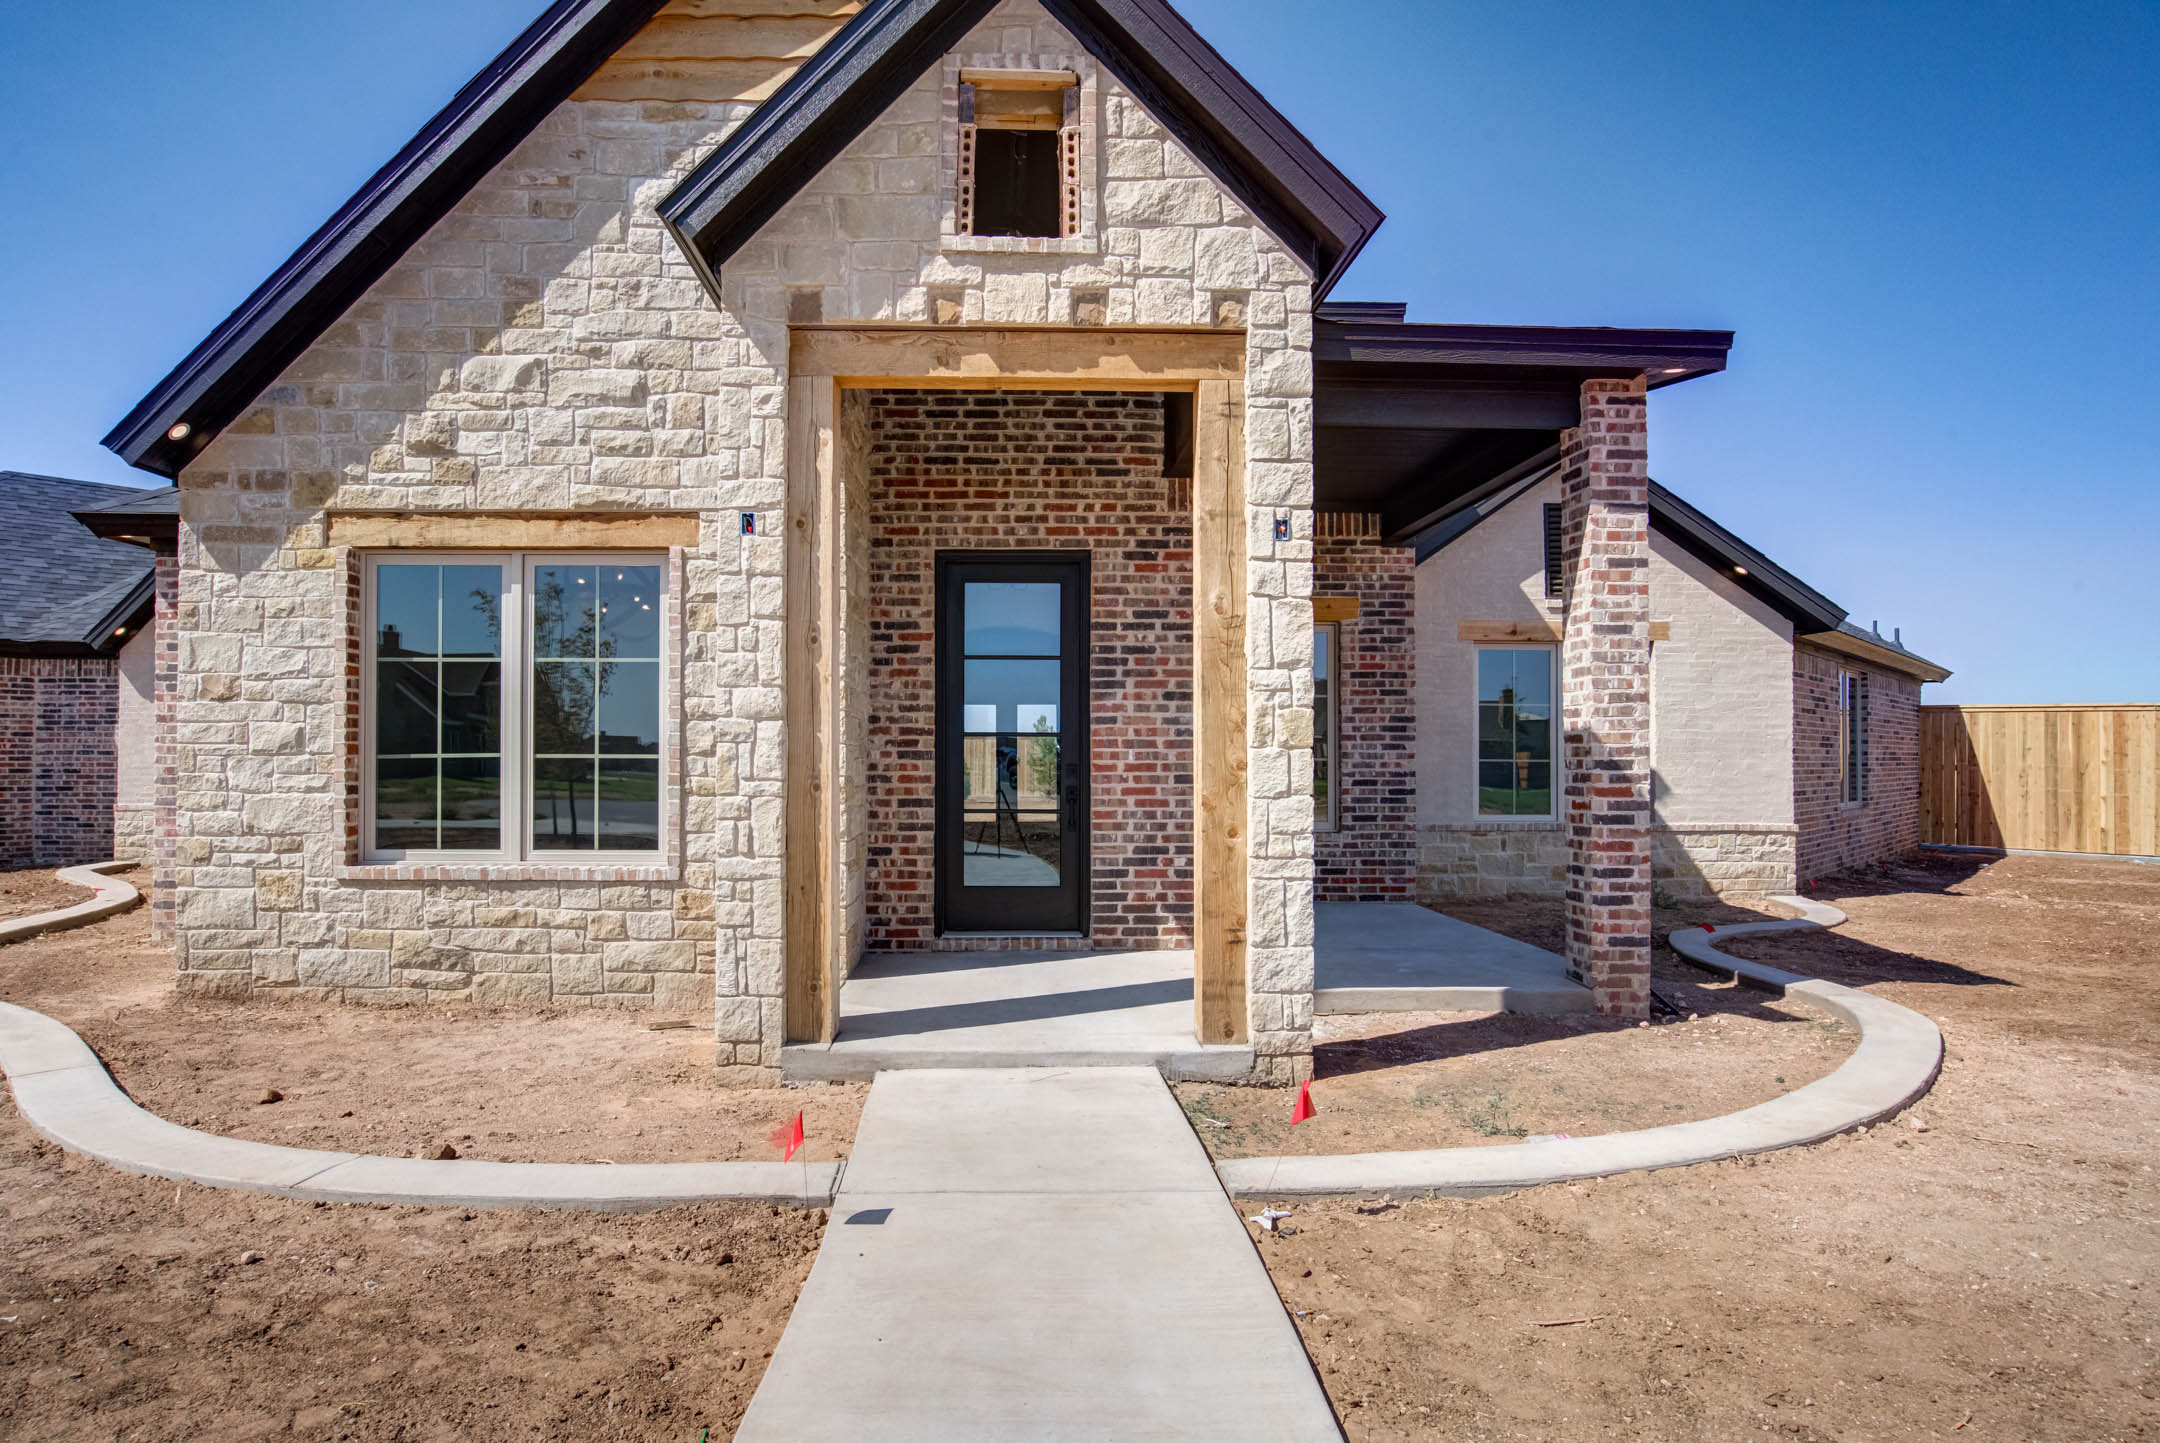 Exterior of beautiful house for sale in New Home, Texas.